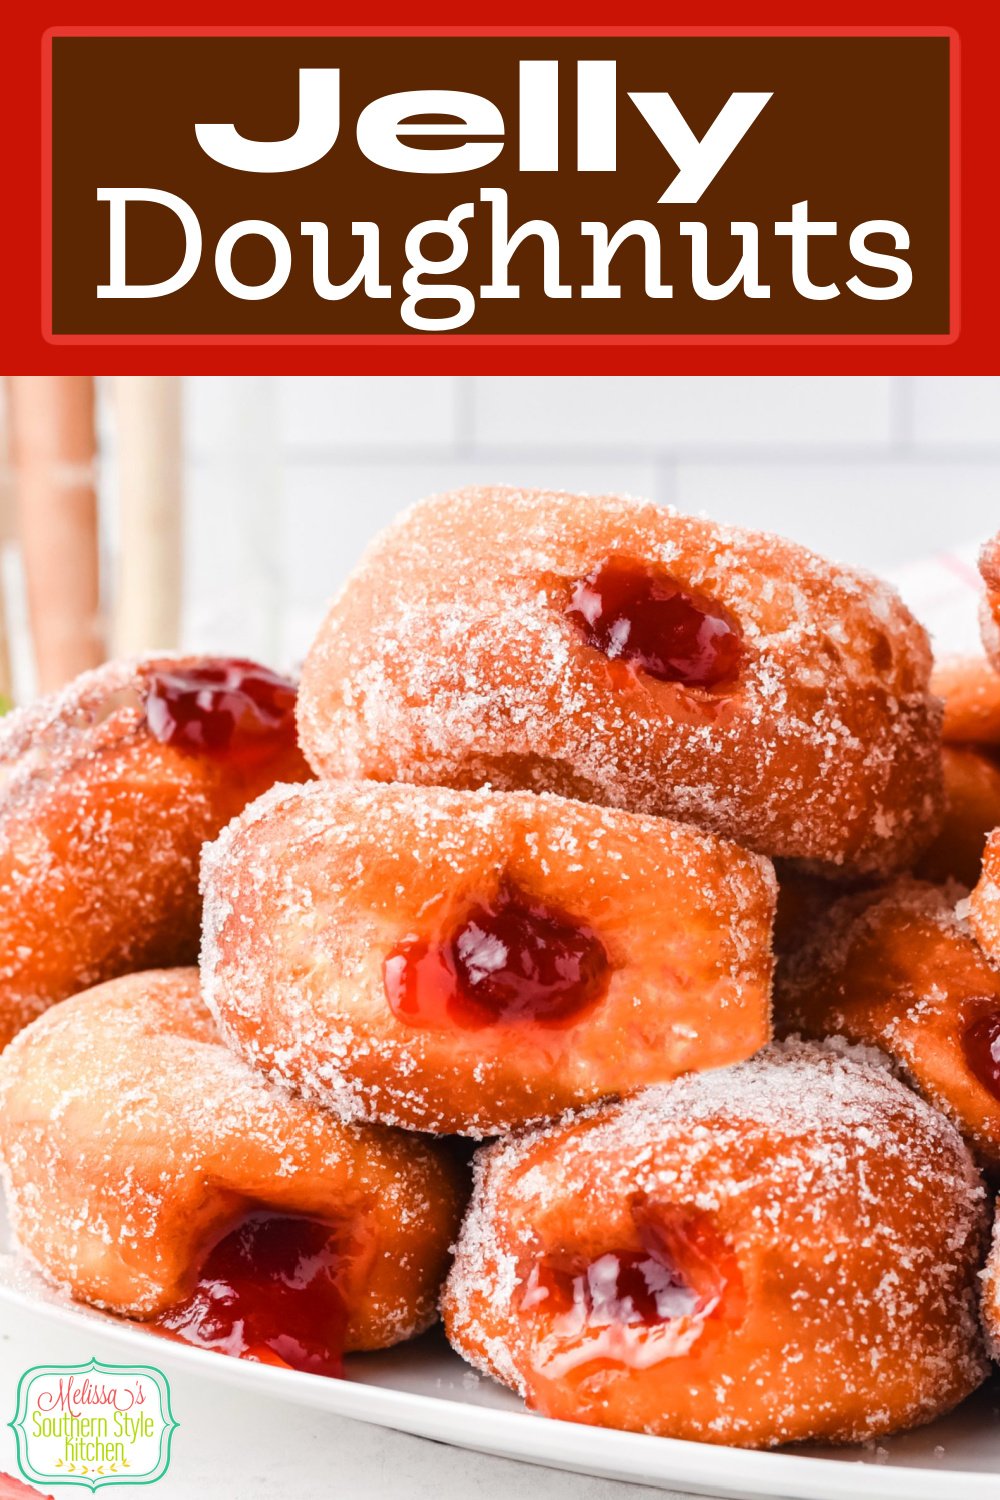 Make the best strawberry Jelly Doughnuts for a sweet treat to enjoy at home #jellydoughnuts #doughnuts #donutrecipes #howtomakejellydoughnuts #bestdonutrecipes #easydoughnutrecipe #doughnuts #strawberrydoughnuts via @melissasssk